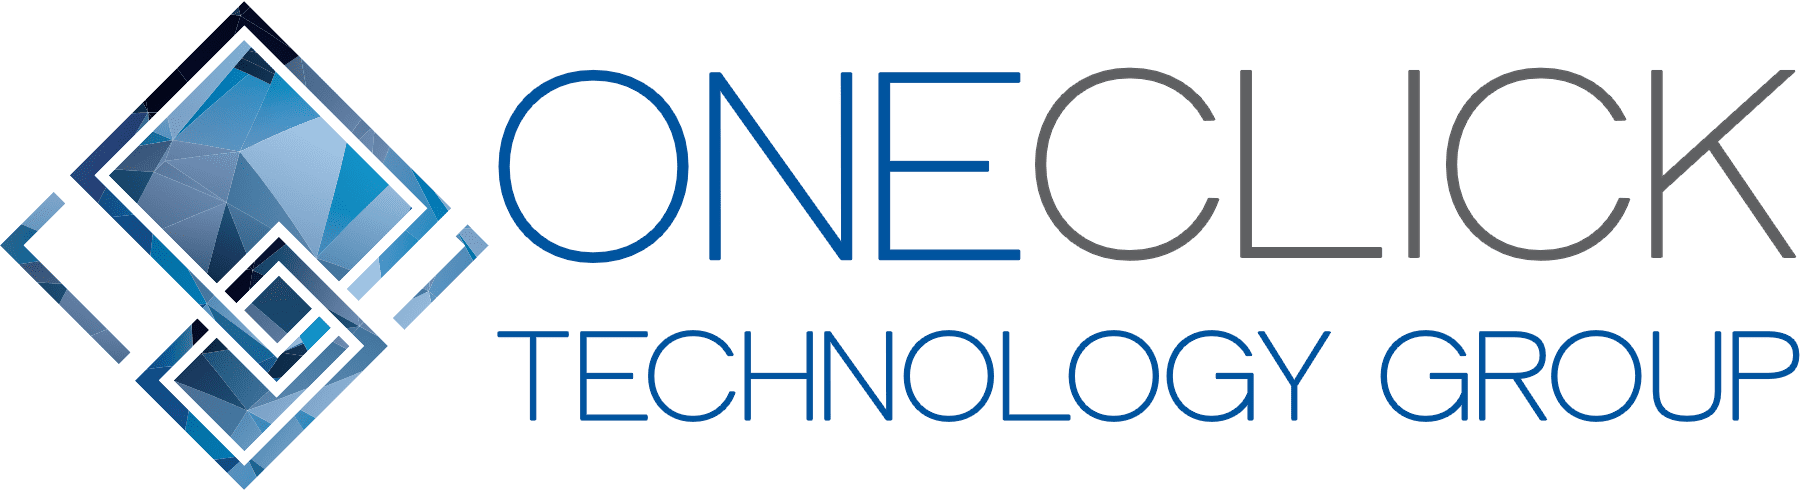 One Click Technology Group